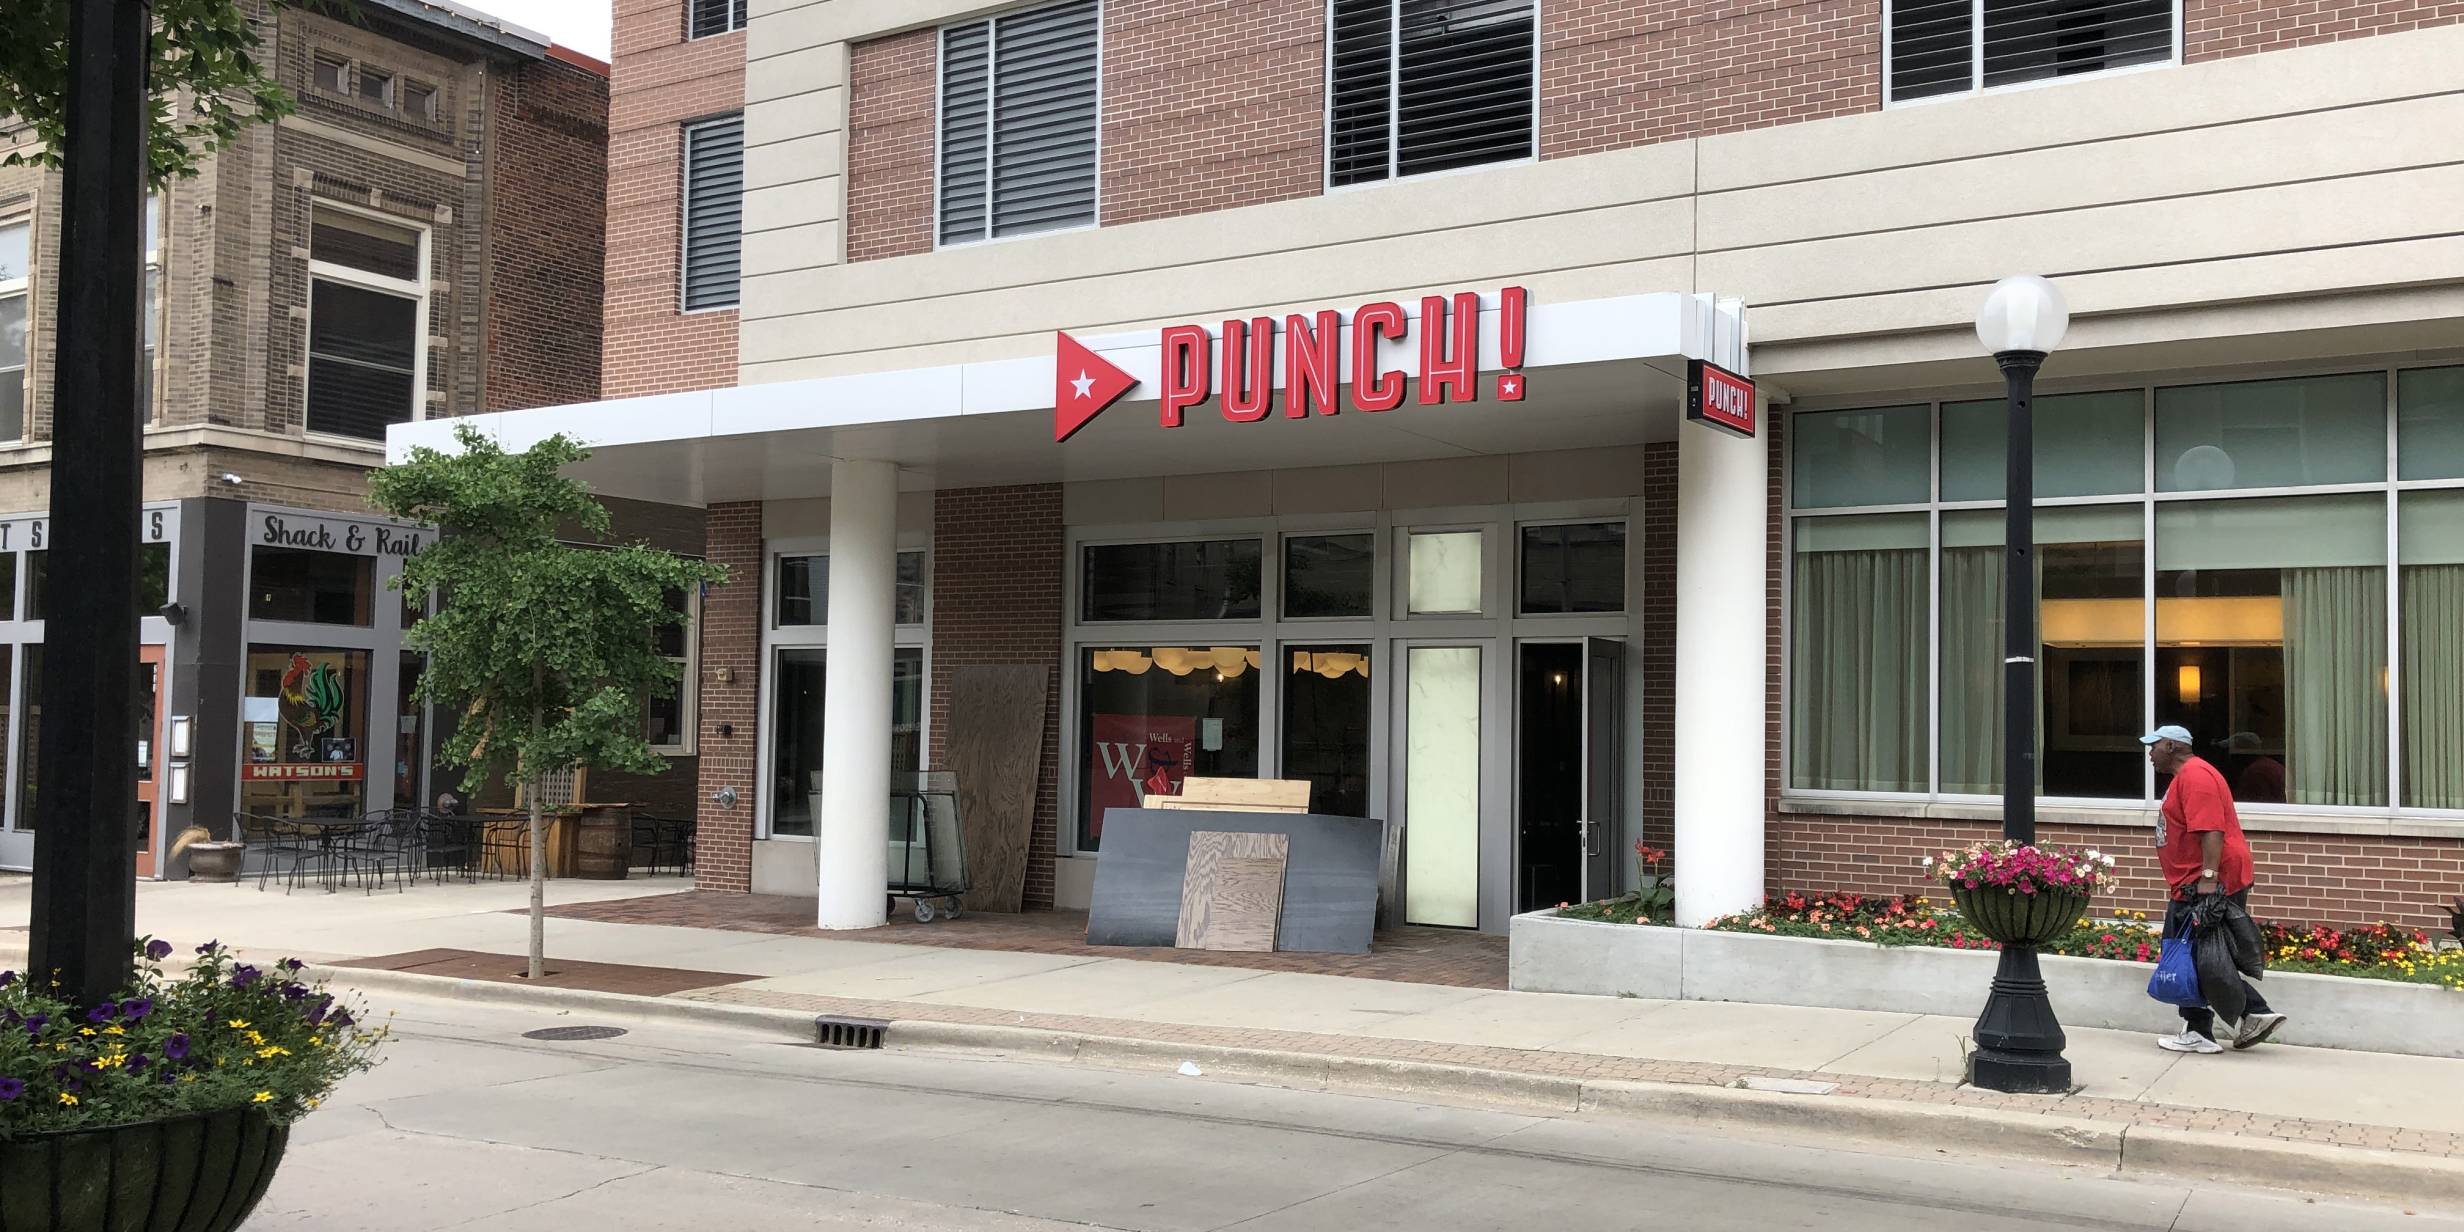 New bar/restaurant Punch! opening soon in Downtown Champaign